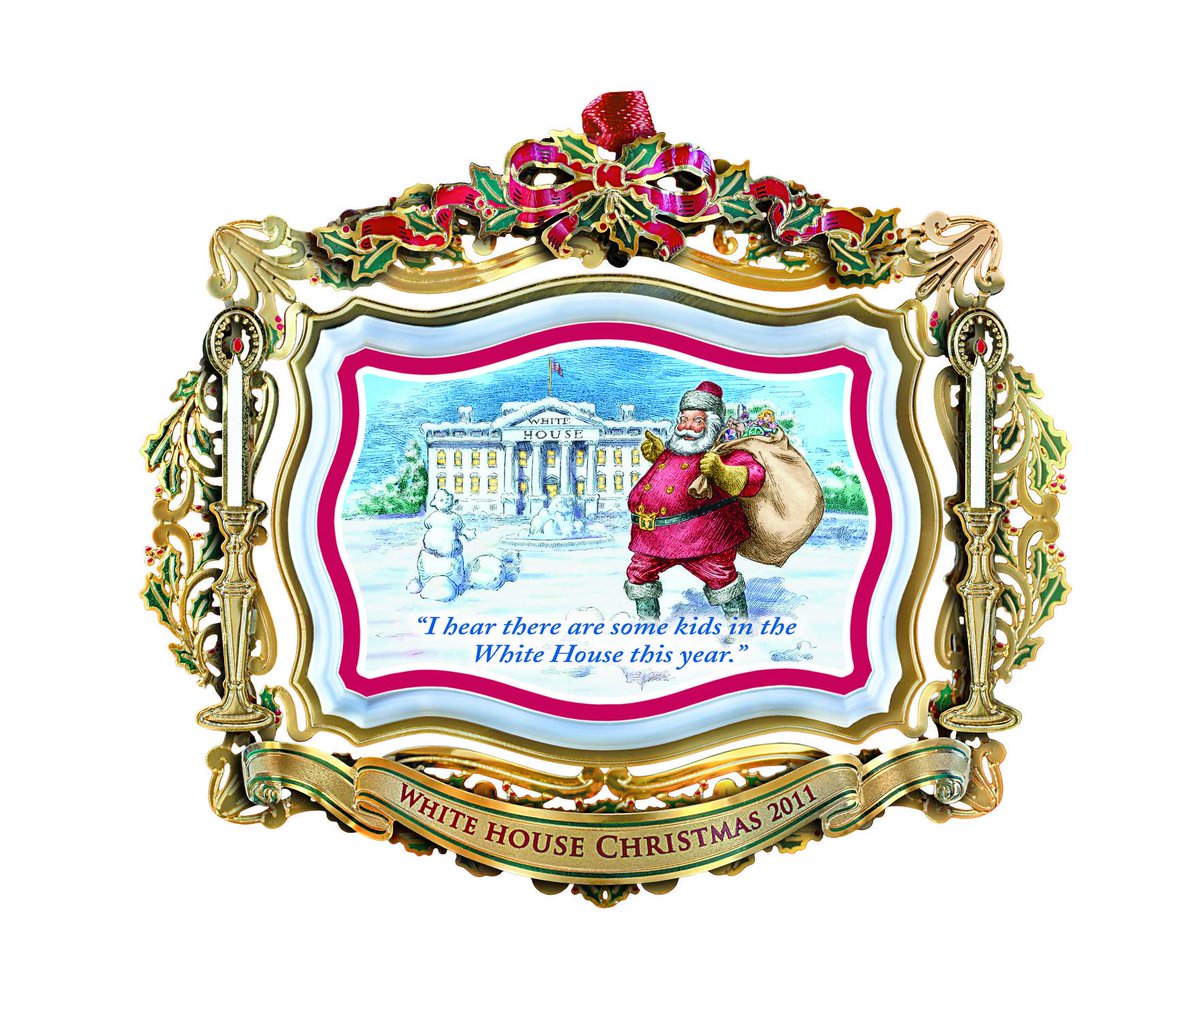 "I hear there are some kids in the White House this year," Santa says on the 2011 ornament honoring President Theodore Roosevelt. The image is derived from a 1901 political cartoon inspired by the life the Roosevelt children brought to the White House. https://shop.whitehousehistory.org/holidays/ornaments/2011-white-house-christmas-ornament-santa-visits-the-white-house-honoring-theodore-roosevelt-26th-president-of-the-united-states-1901-1909